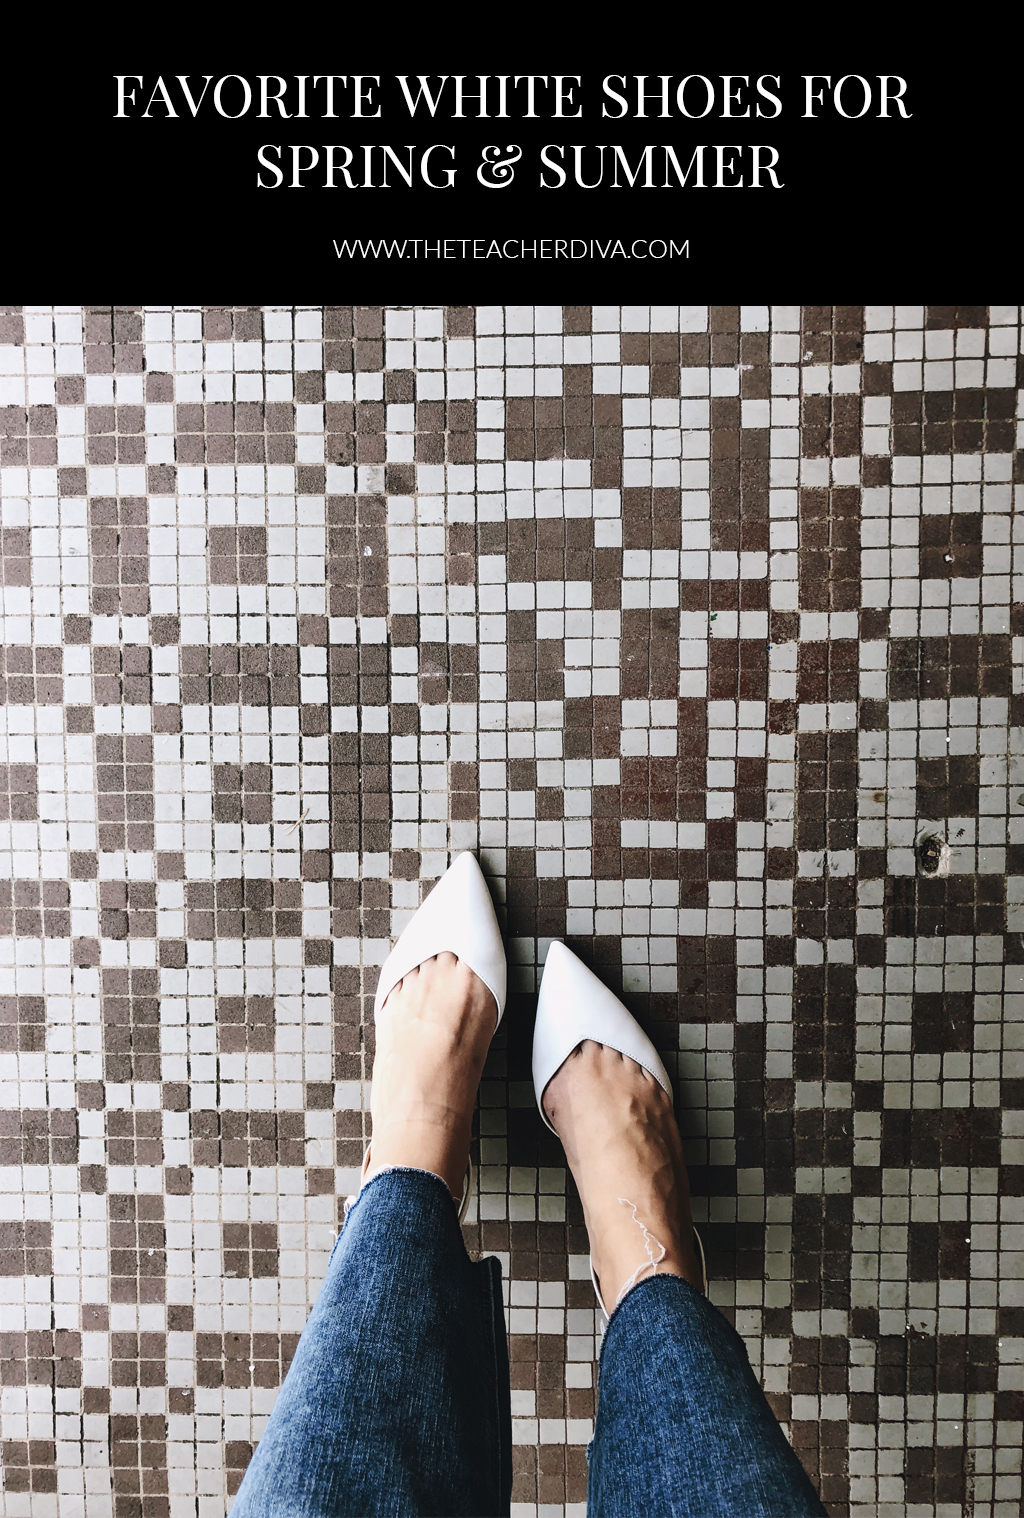 hud binding pyramide Your Guide to the Best White Shoes For Spring + Summer | The Teacher Diva:  a Dallas Fashion Blog featuring Beauty & Lifestyle